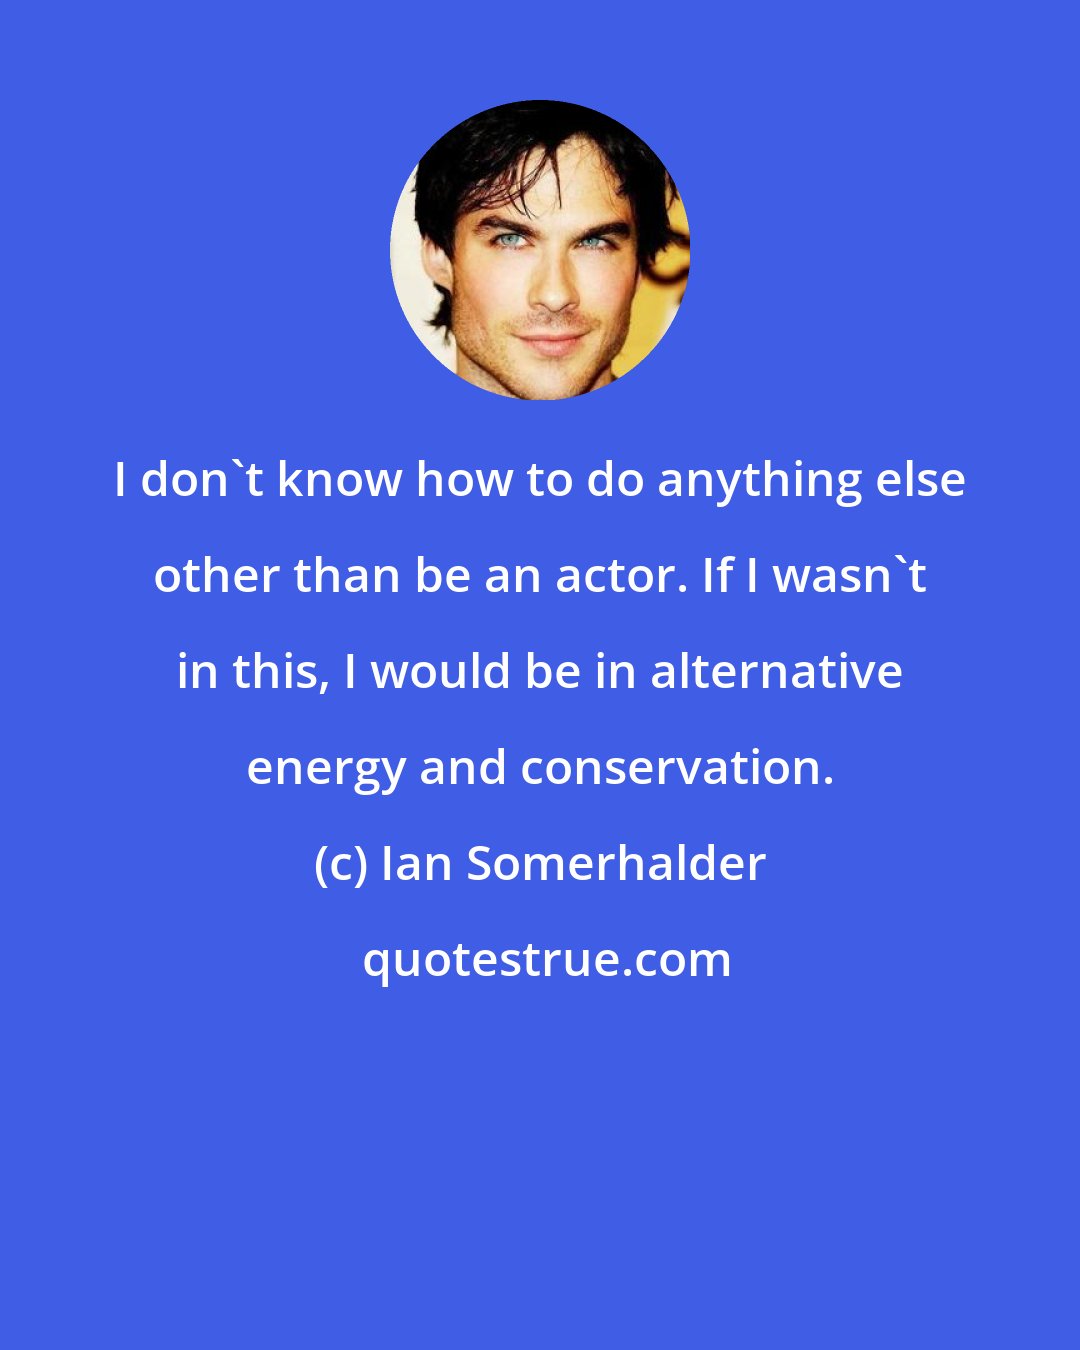 Ian Somerhalder: I don't know how to do anything else other than be an actor. If I wasn't in this, I would be in alternative energy and conservation.